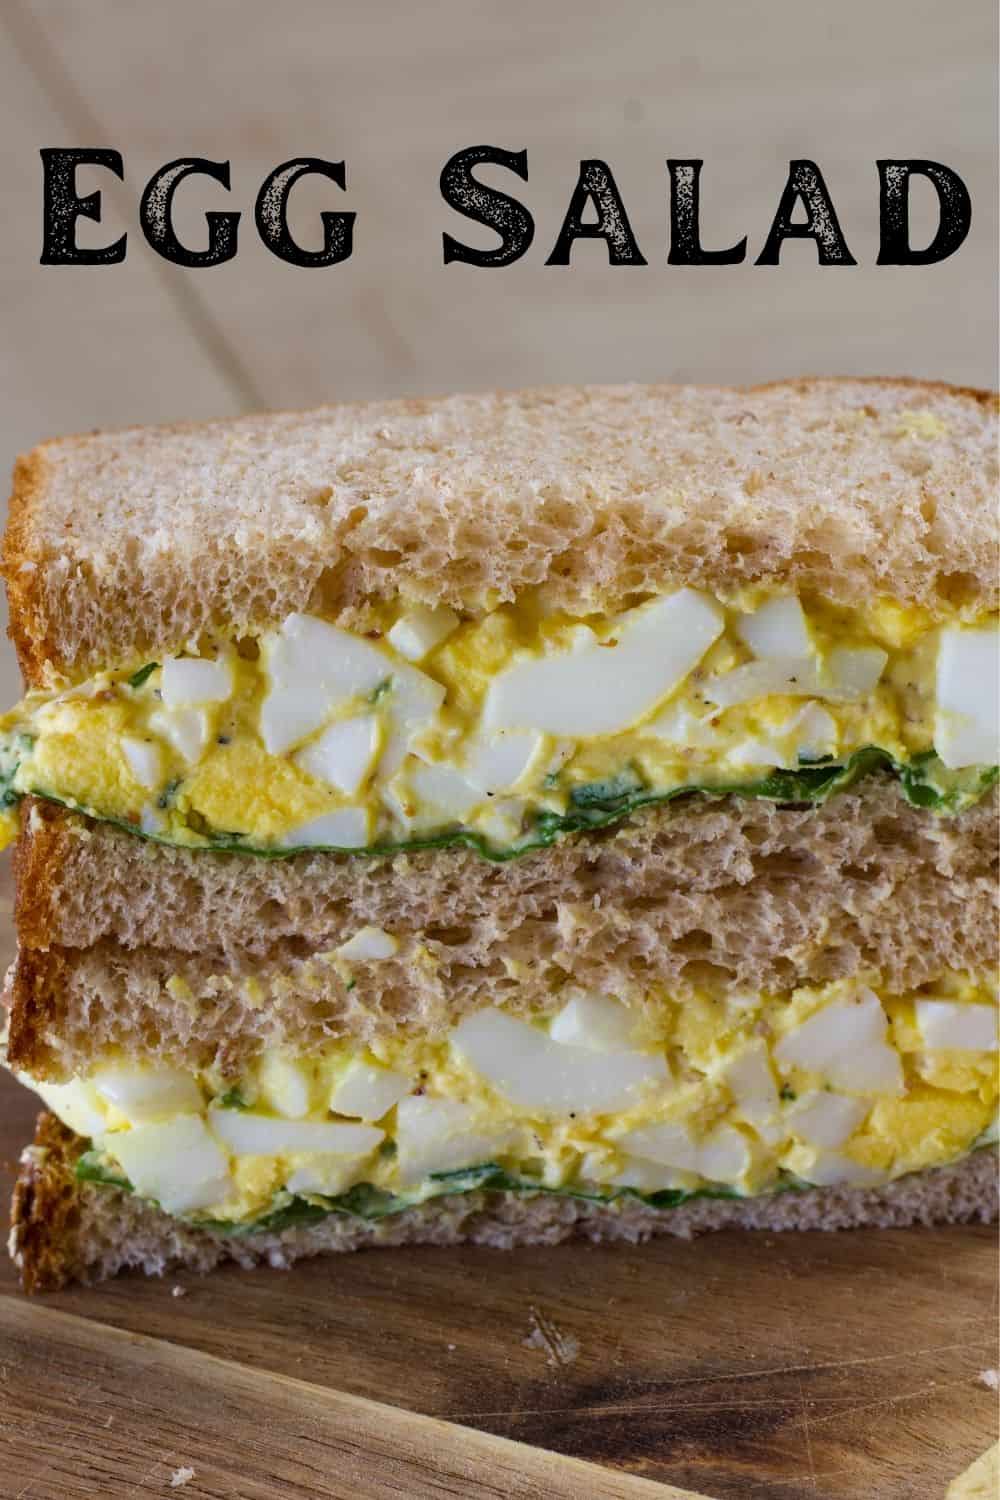 How to make a Classic Egg Salad sandwich with mayonnaise, grainy Dijon mustard, salt pepper and chives. An easy, simple and quick recipe.